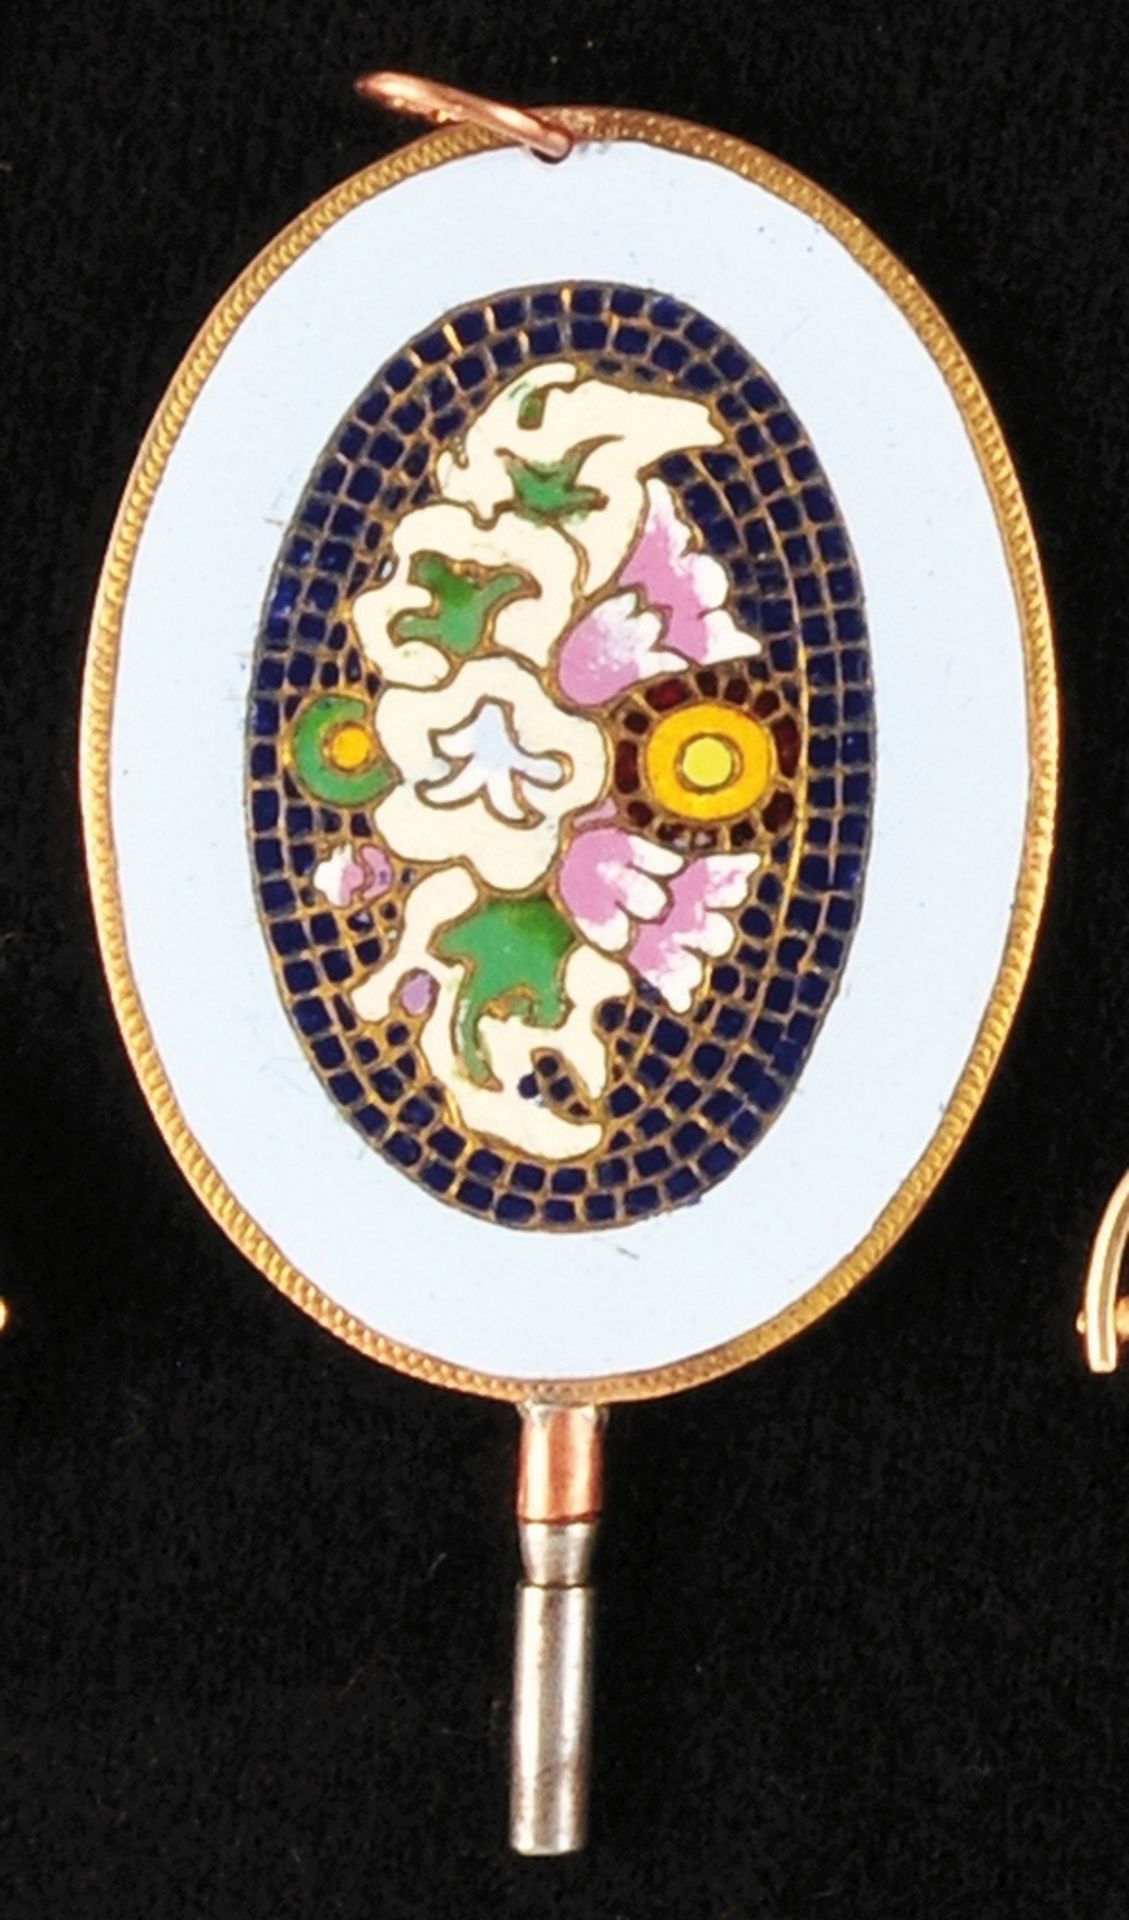 Pocket watch key, oval, multicolored floral enamel center in mosaic style surrounded by light blue e